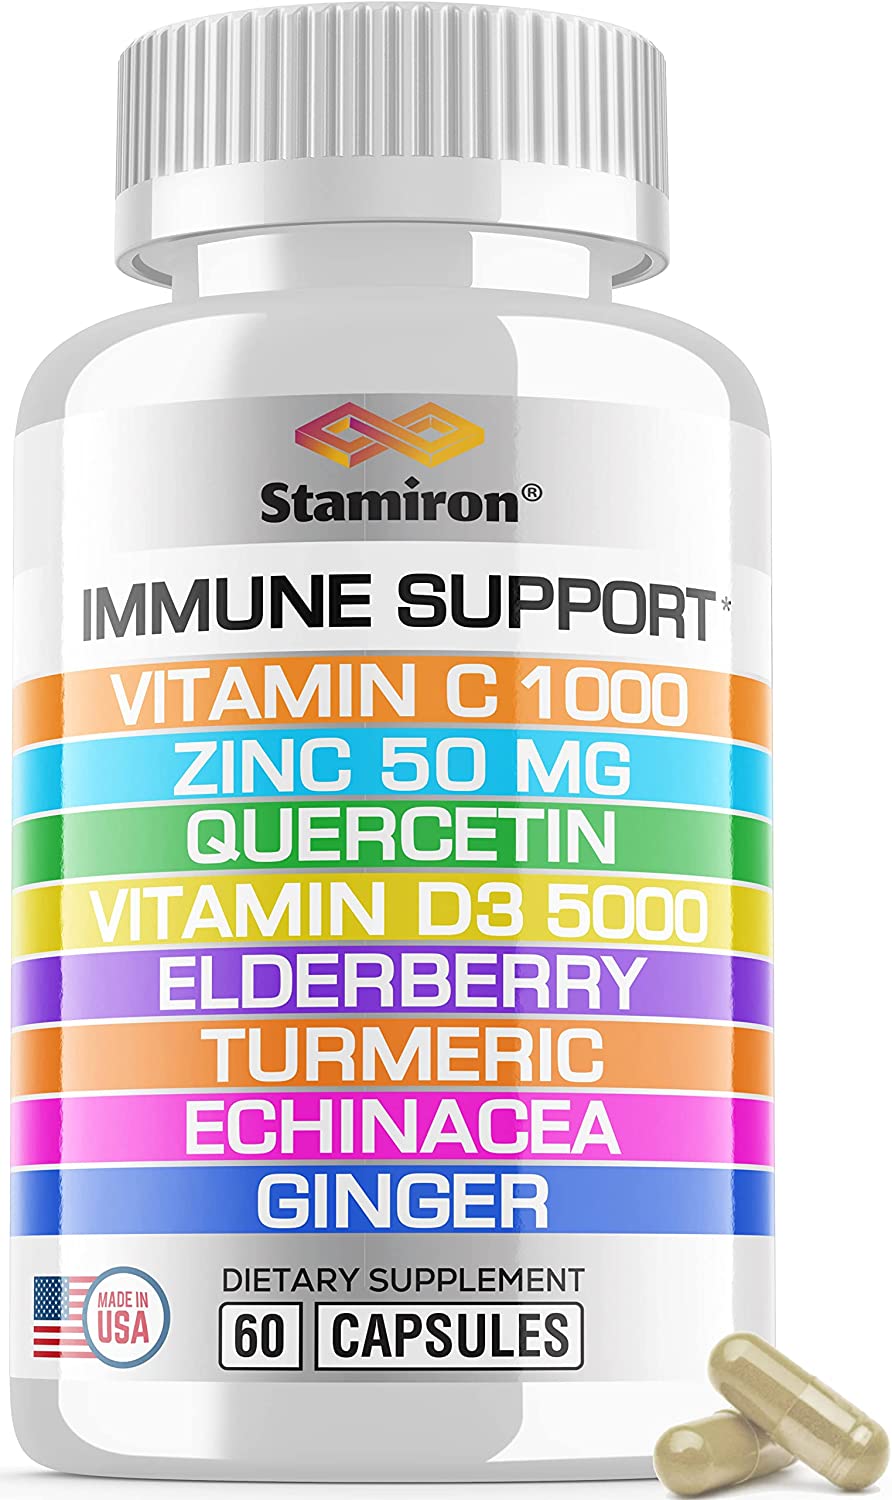 8in1 Immune Support w/ Quercetin Made in USA